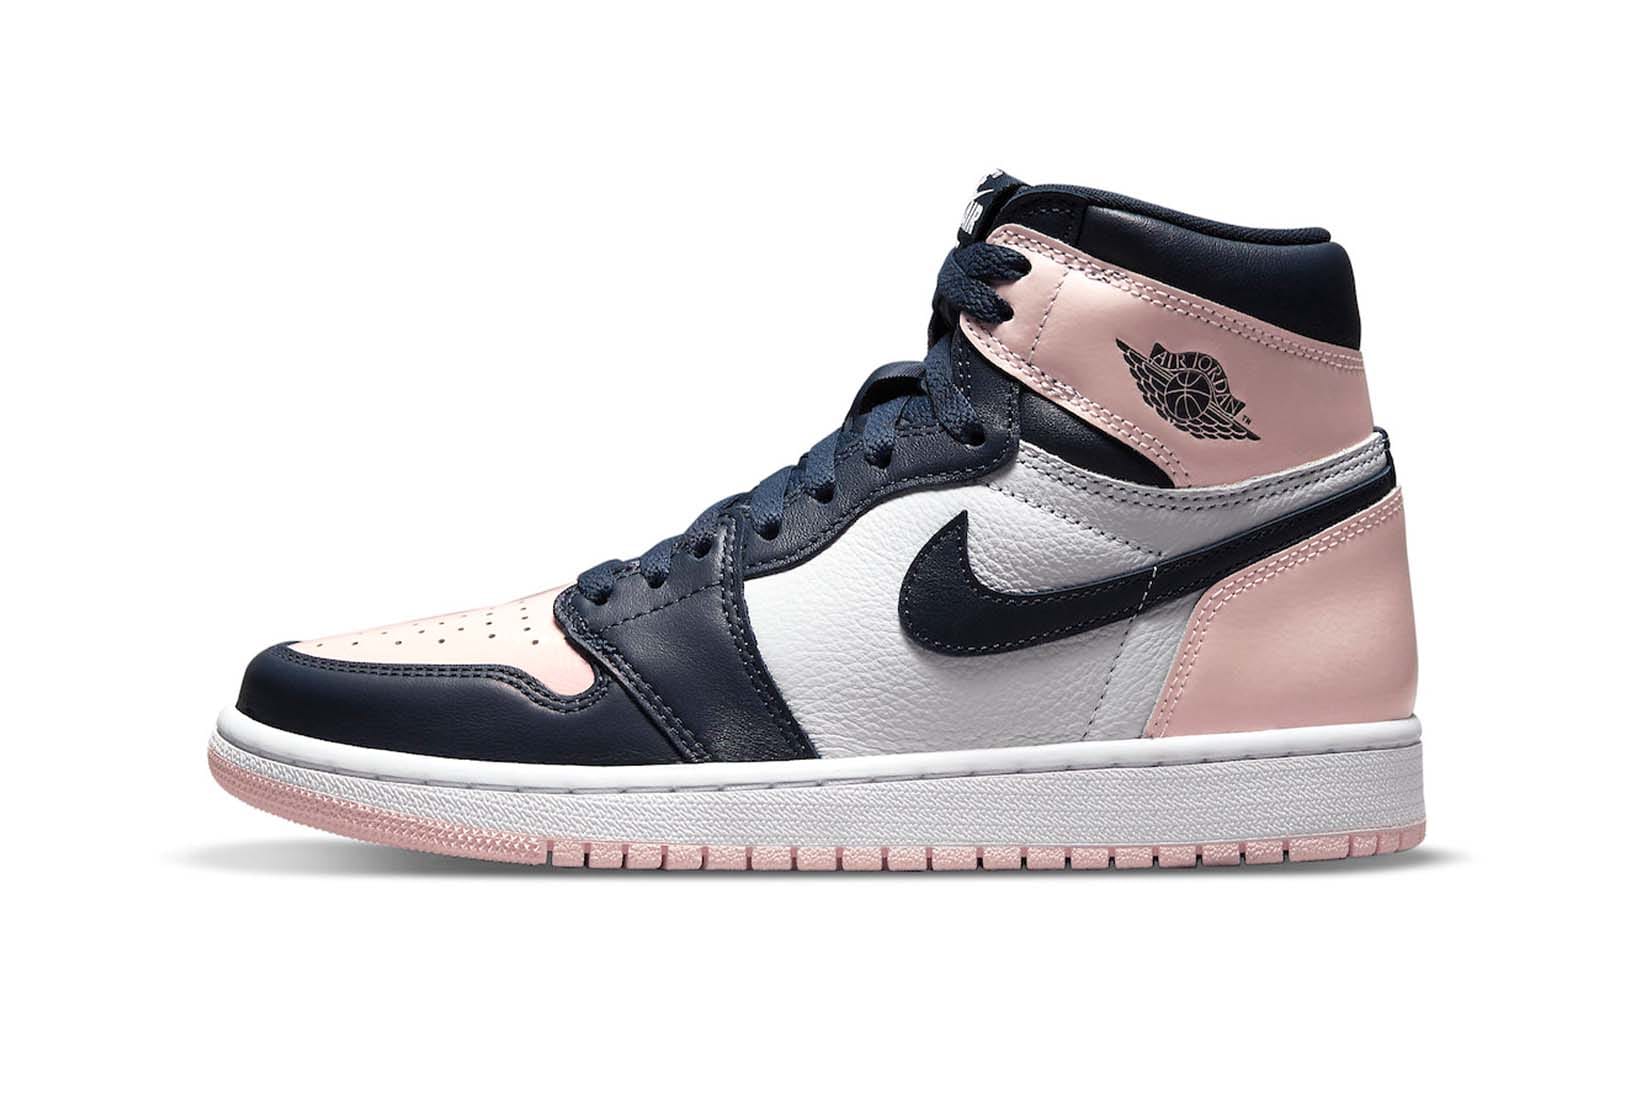 gray and pink jordans new release